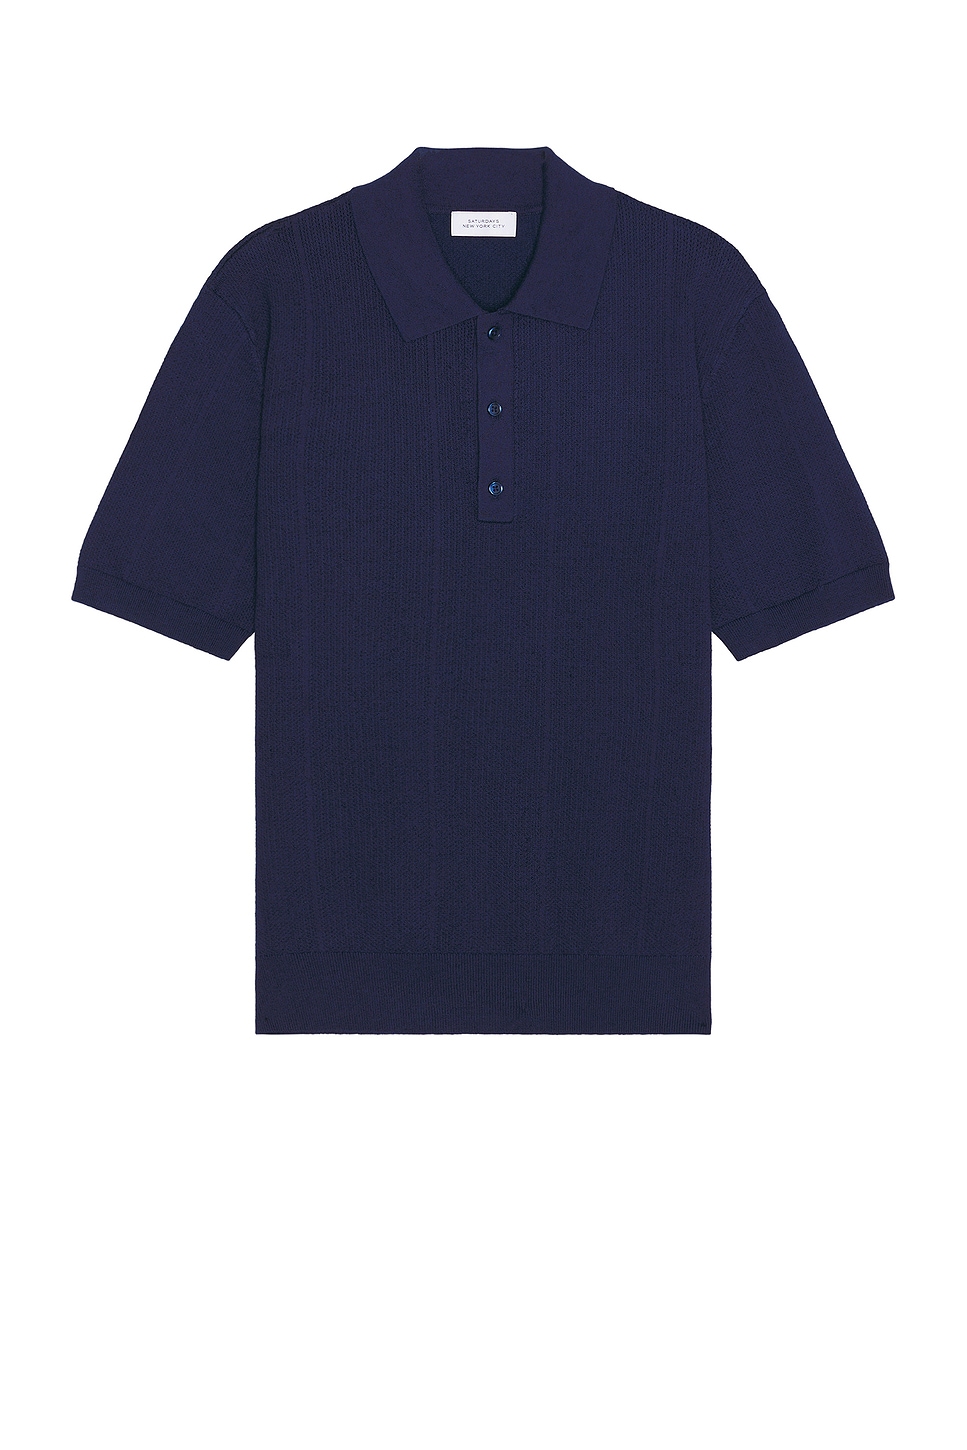 Image 1 of SATURDAYS NYC Jahmad Knit Polo in Ocean